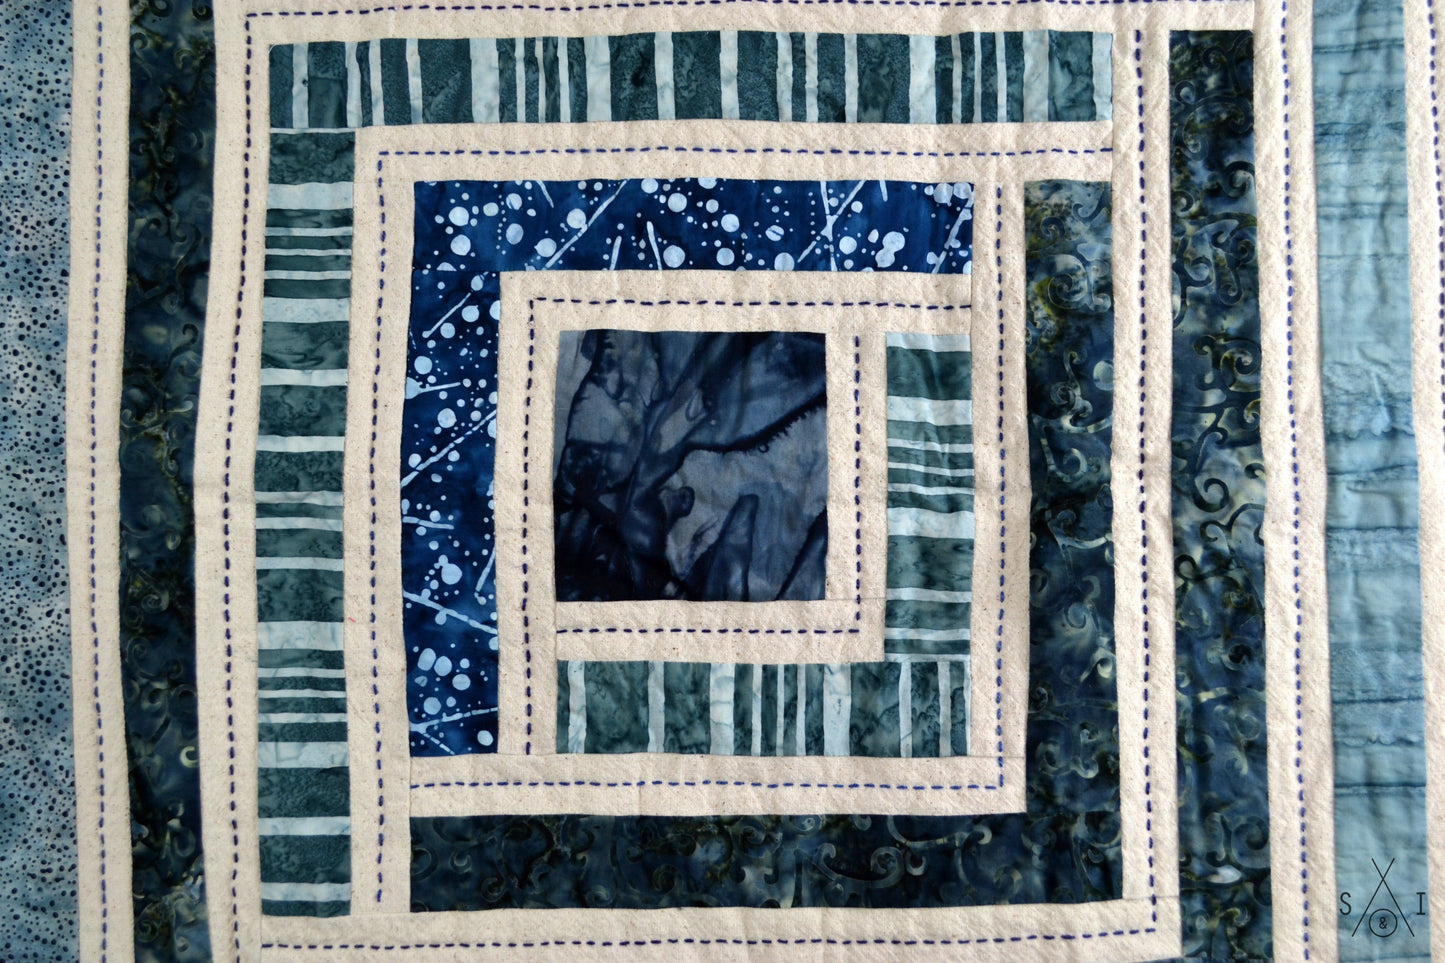 campfire baby quilt: blue batiks and osnaburg fabric